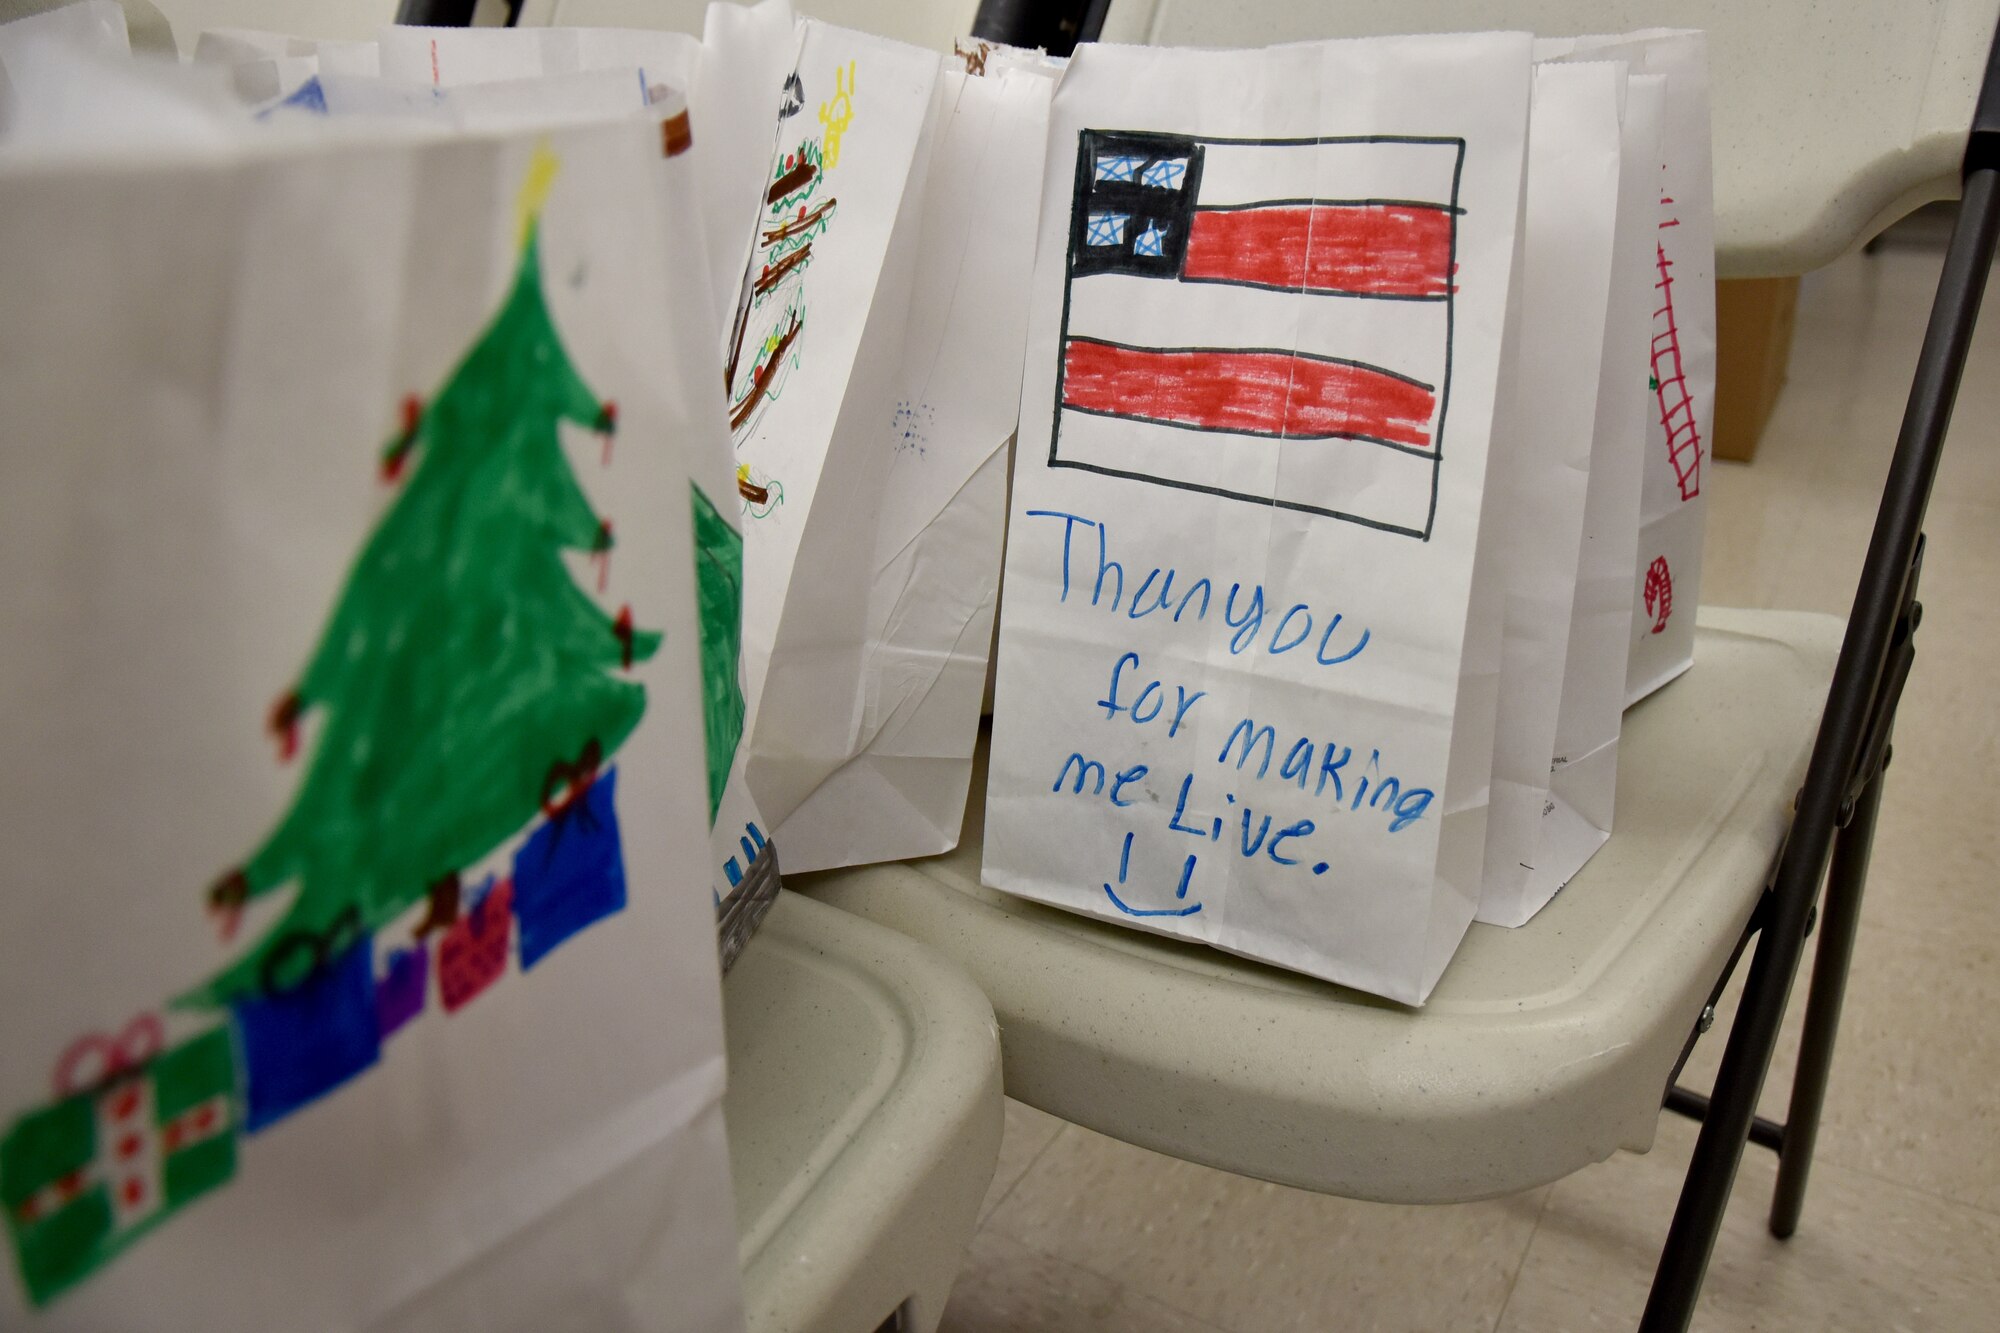 Children from a local school decorated the bags the cookies were placed in with festive artwork. They thanked service members and wished them a Merry Christmas. (U.S. Air Force photo by 2nd Lt. Matthew Stott/Released)